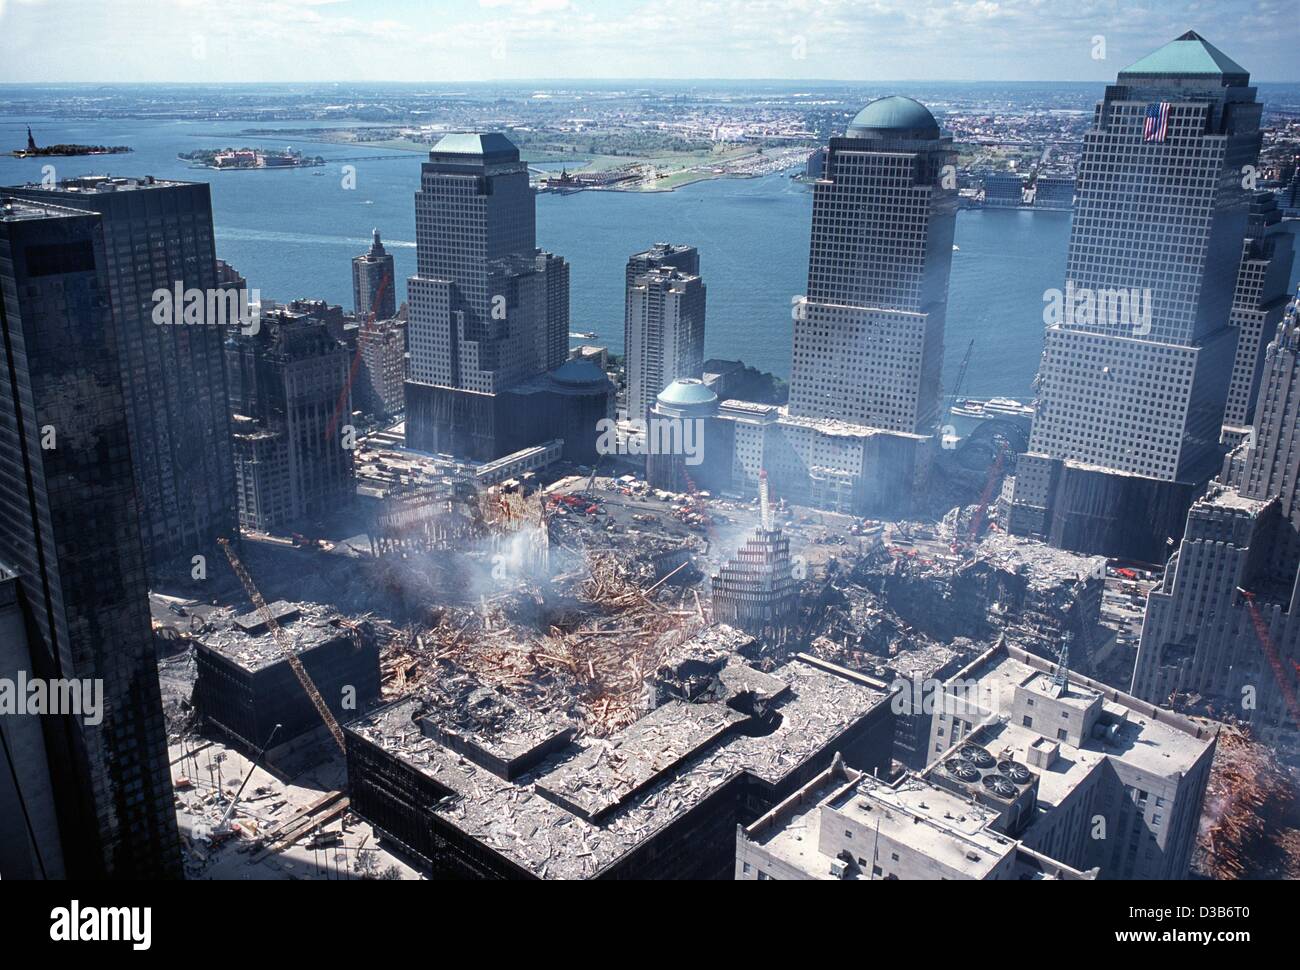 (dpa) - Smoke ist still rising from Ground Zero more than two weeks after the World Trade Center catastrophe in New York, 26 September 2001. 2,823 people were killed when Islamic terrorists crashed into the WTC with highjacked planes. Together with 189 dead in the Pentagon attack of plane no. 3 and  Stock Photo